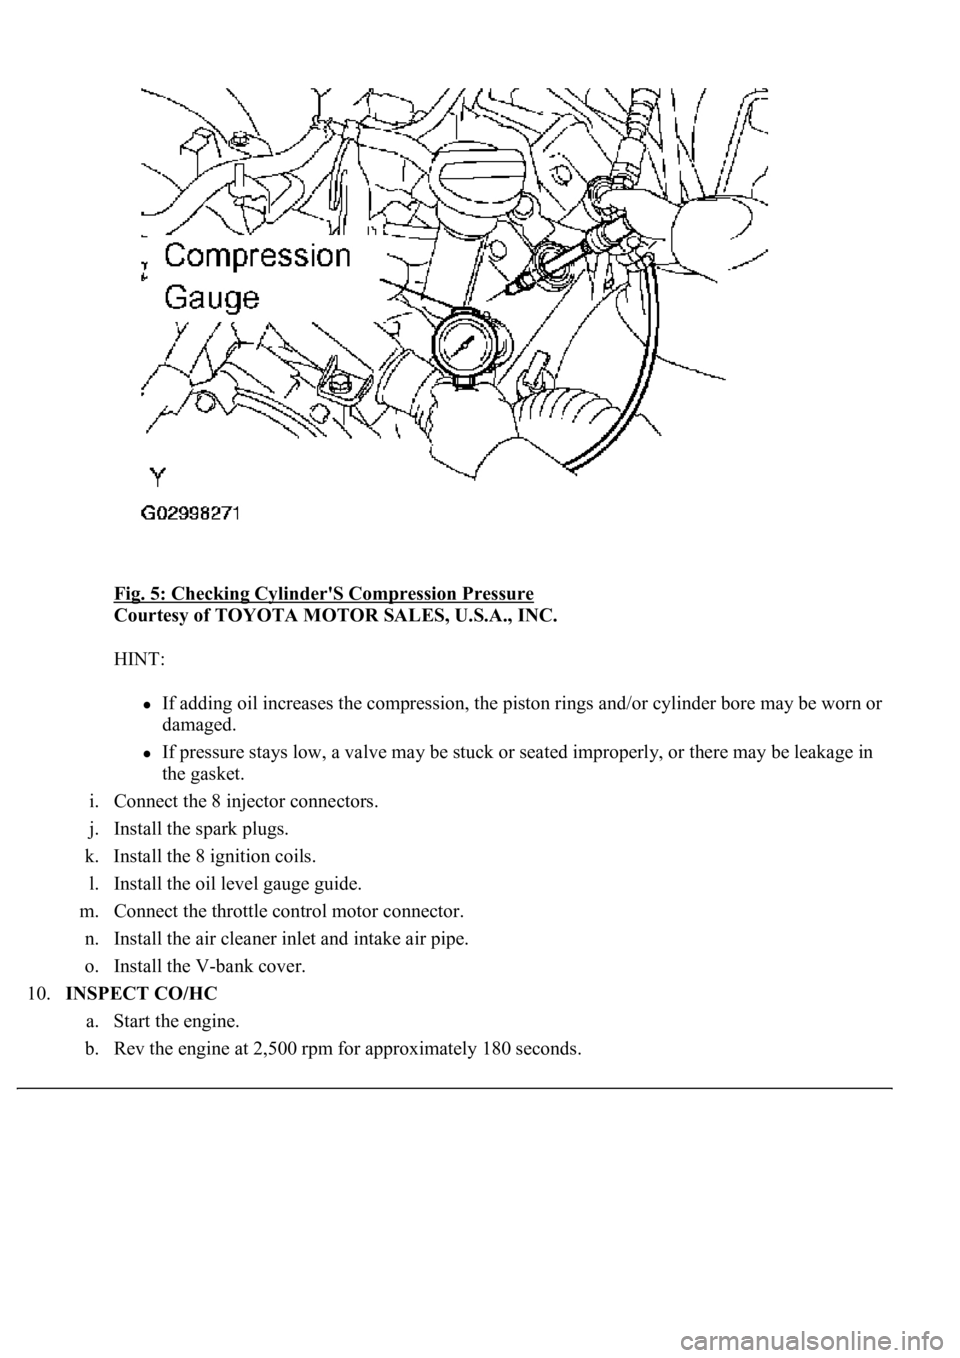 LEXUS LS430 2003  Factory Repair Manual Fig. 5: Checking Cylinder'S Compression Pressure 
Courtesy of TOYOTA MOTOR SALES, U.S.A., INC. 
HINT: 
If adding oil increases the compression, the piston rings and/or cylinder bore may be worn or